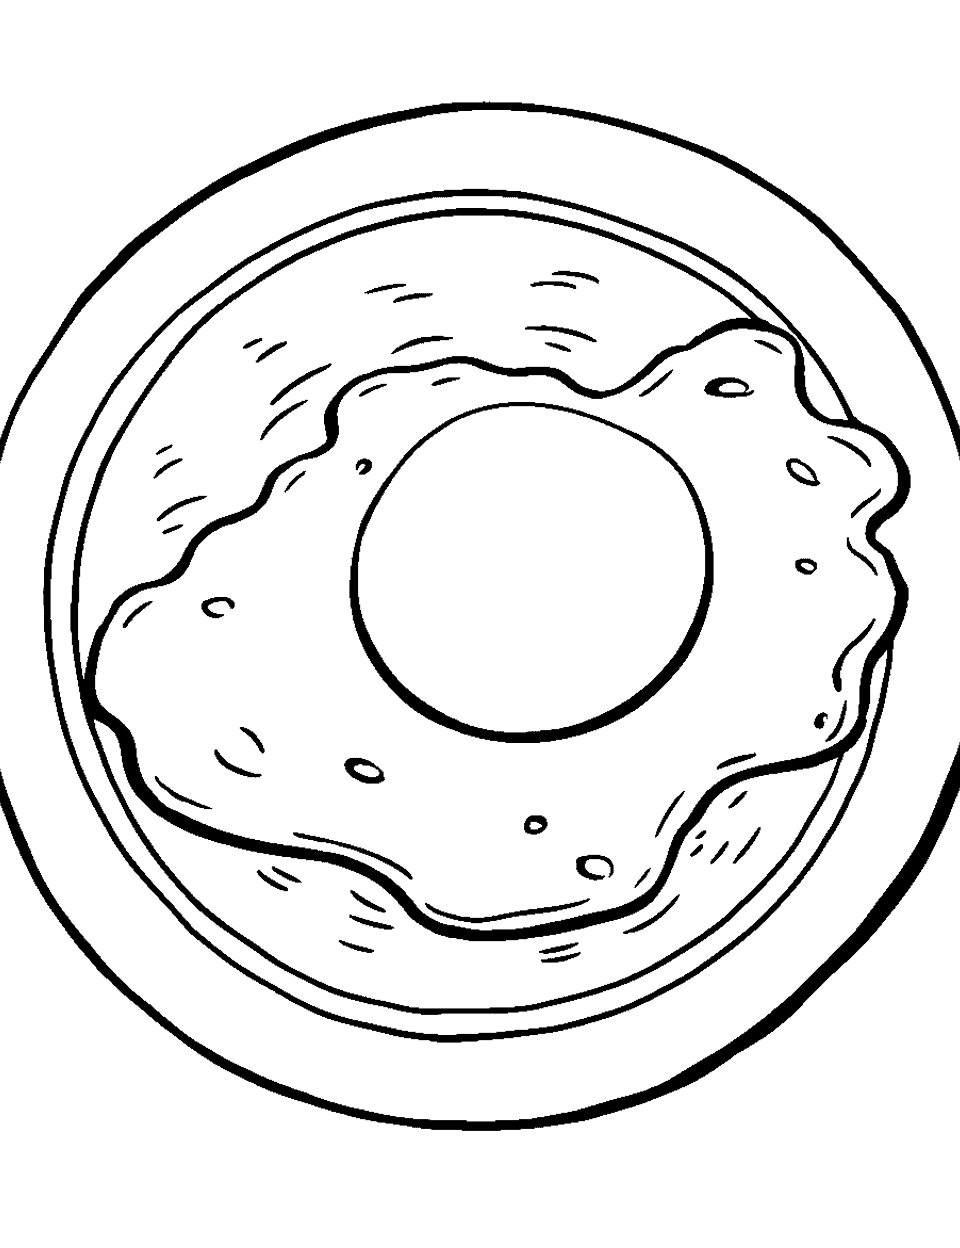 Breakfast Sunny Side Food Coloring Page - A sunny side-up egg on a plate.